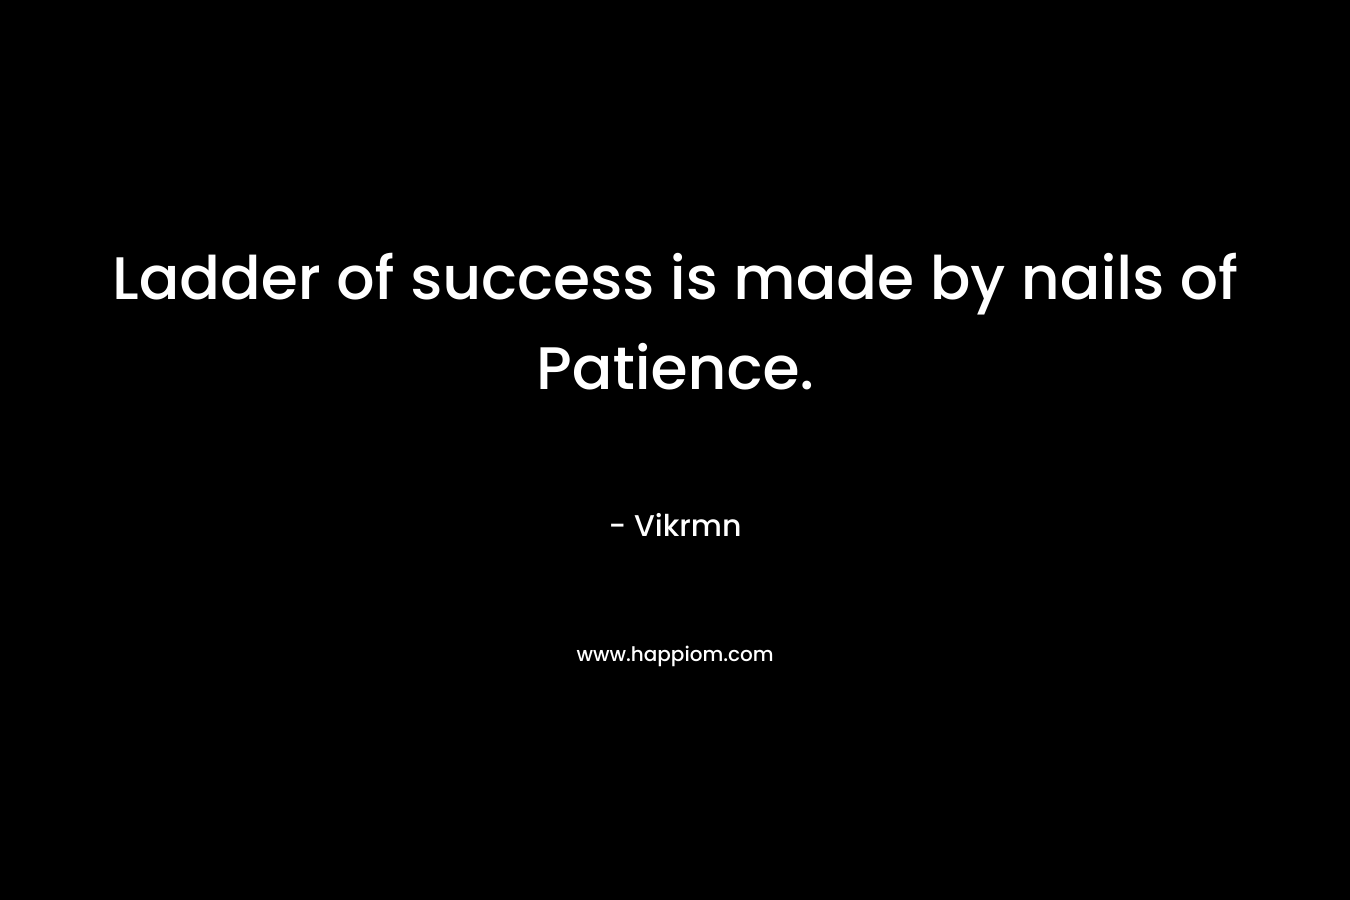 Ladder of success is made by nails of Patience.